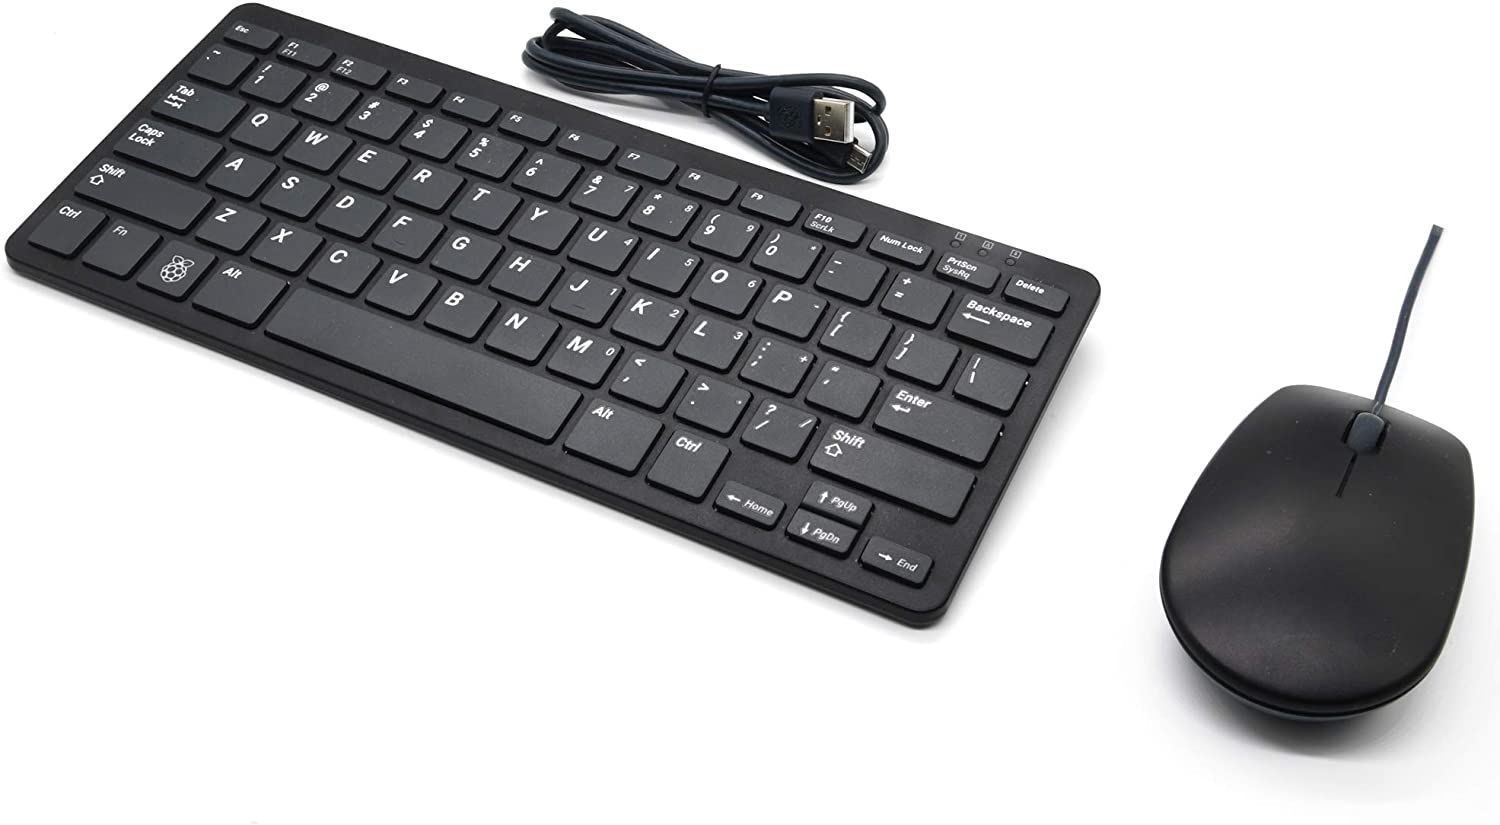 Raspberry Pi keyboard and mouse